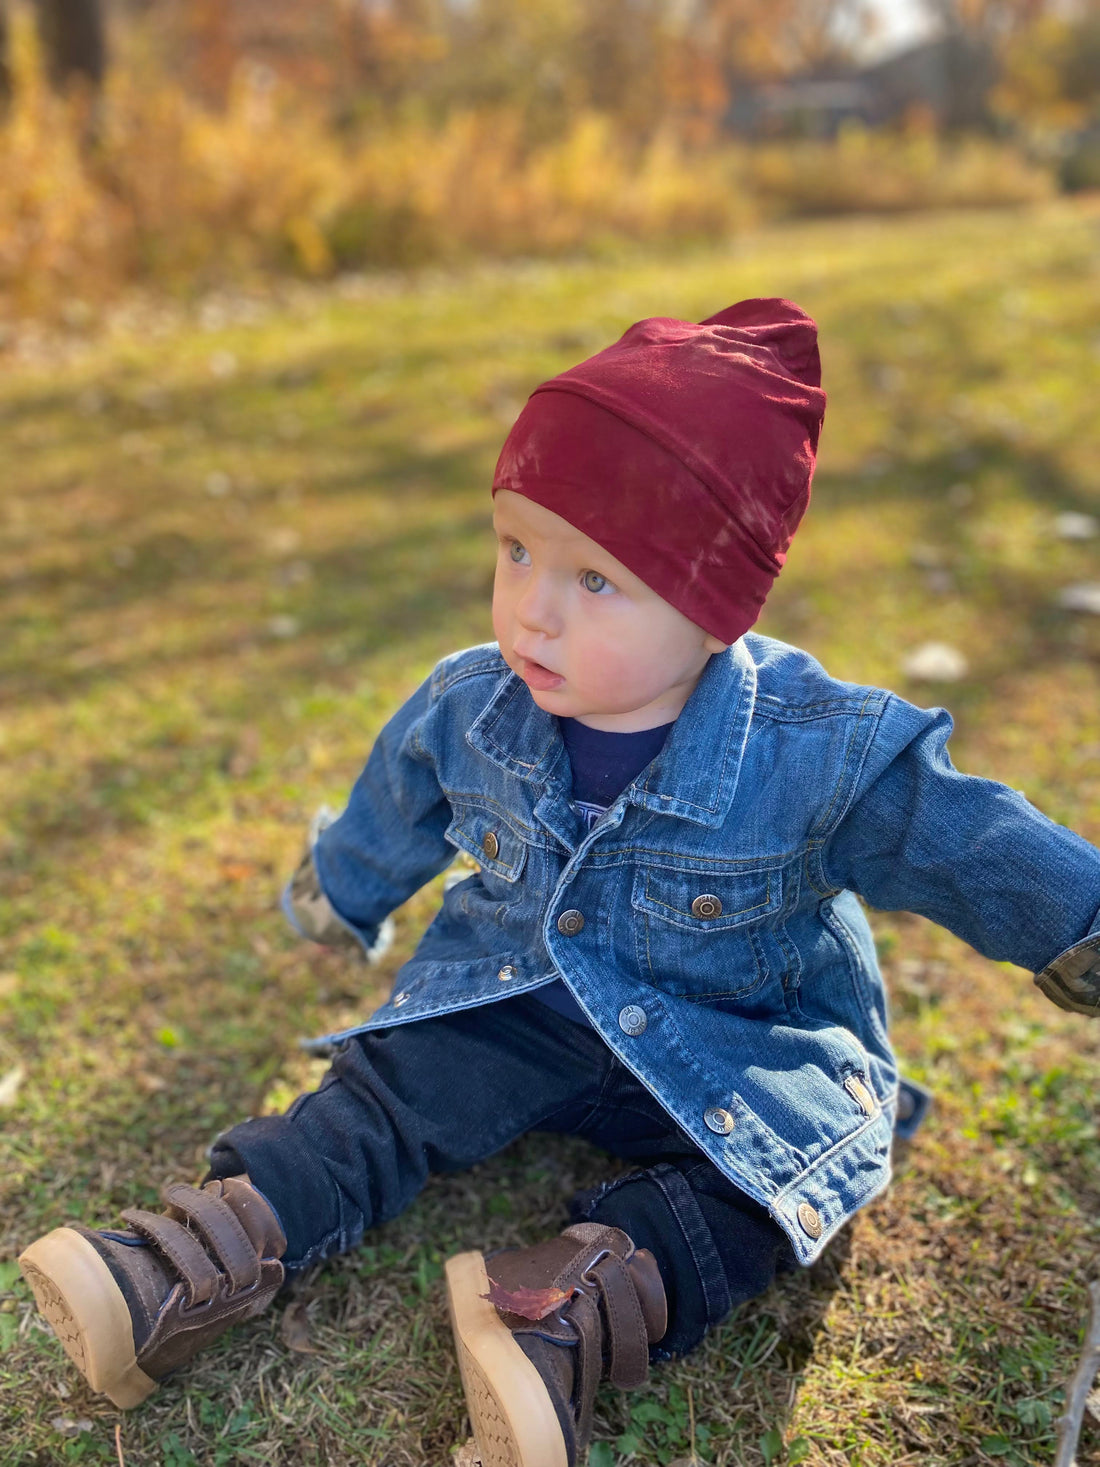 We Rated 6 Natural Fibers for your Kids Apparel and there is a Clear Winner...